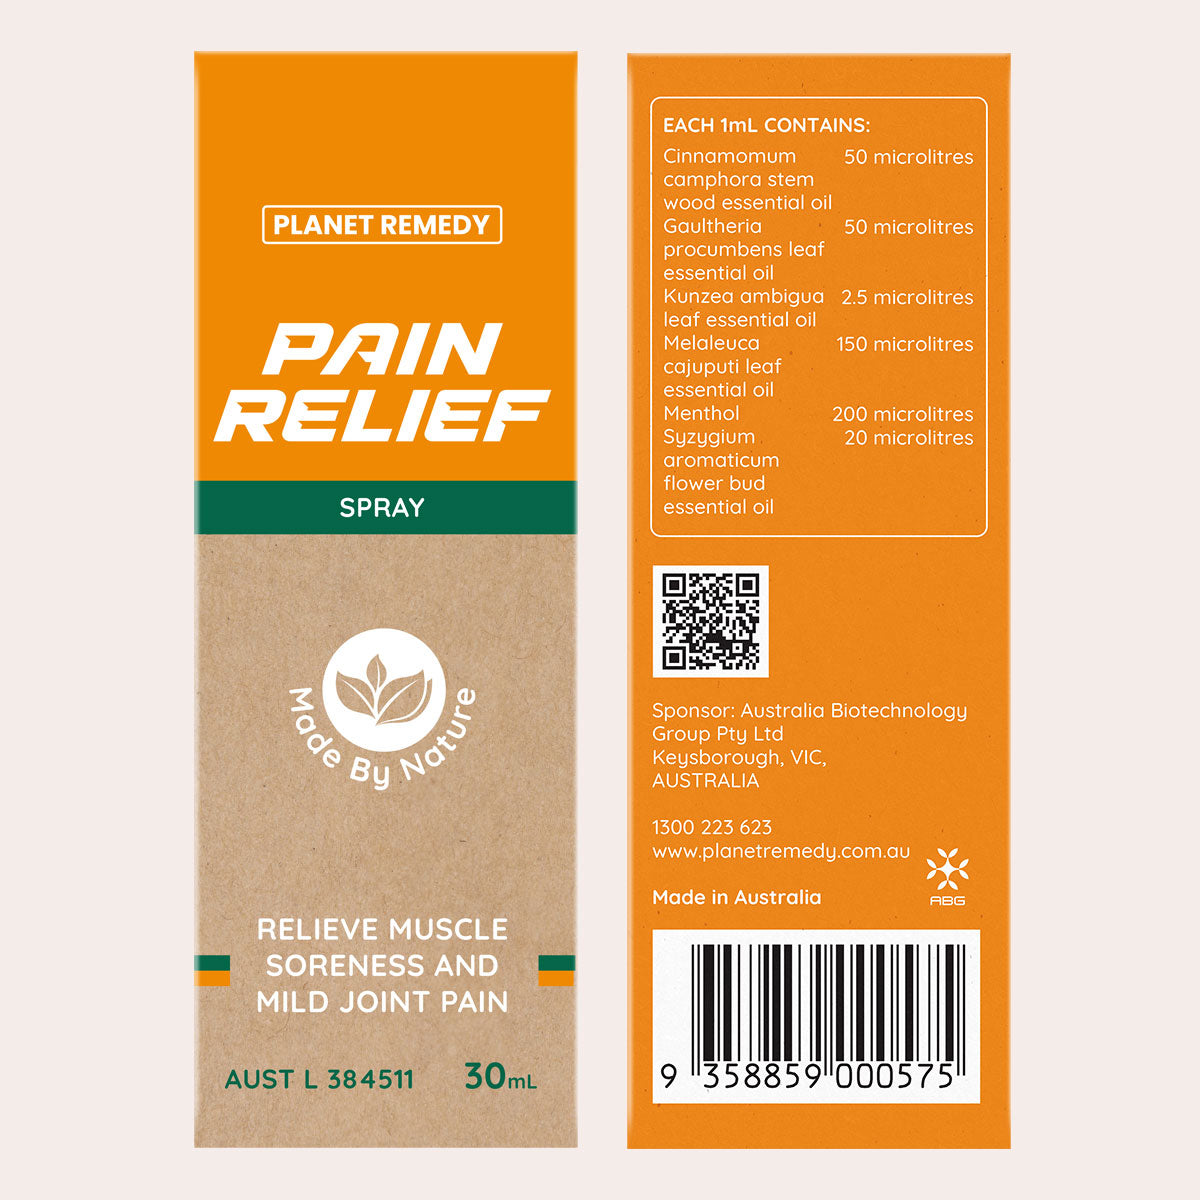 Planet Remedy Pain Relief Spray